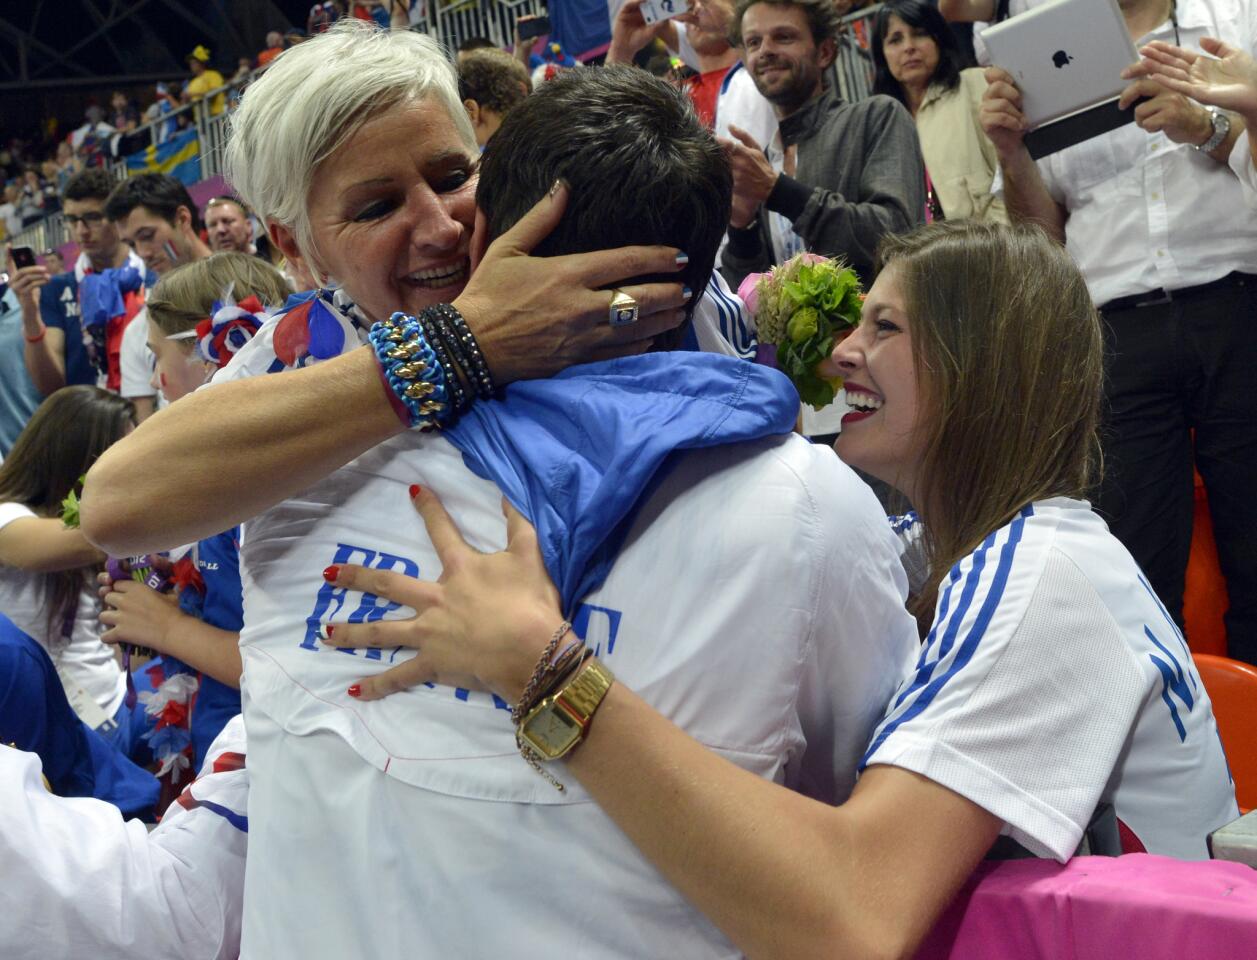 France's centreback Nikola Karabatic (C) celebrates with his mother Radmila (L) after winning the men's gold medal handball match between Sweden and France for the London 2012 Olympics Games on August 12, 2012 at the Basketball Arena in London.